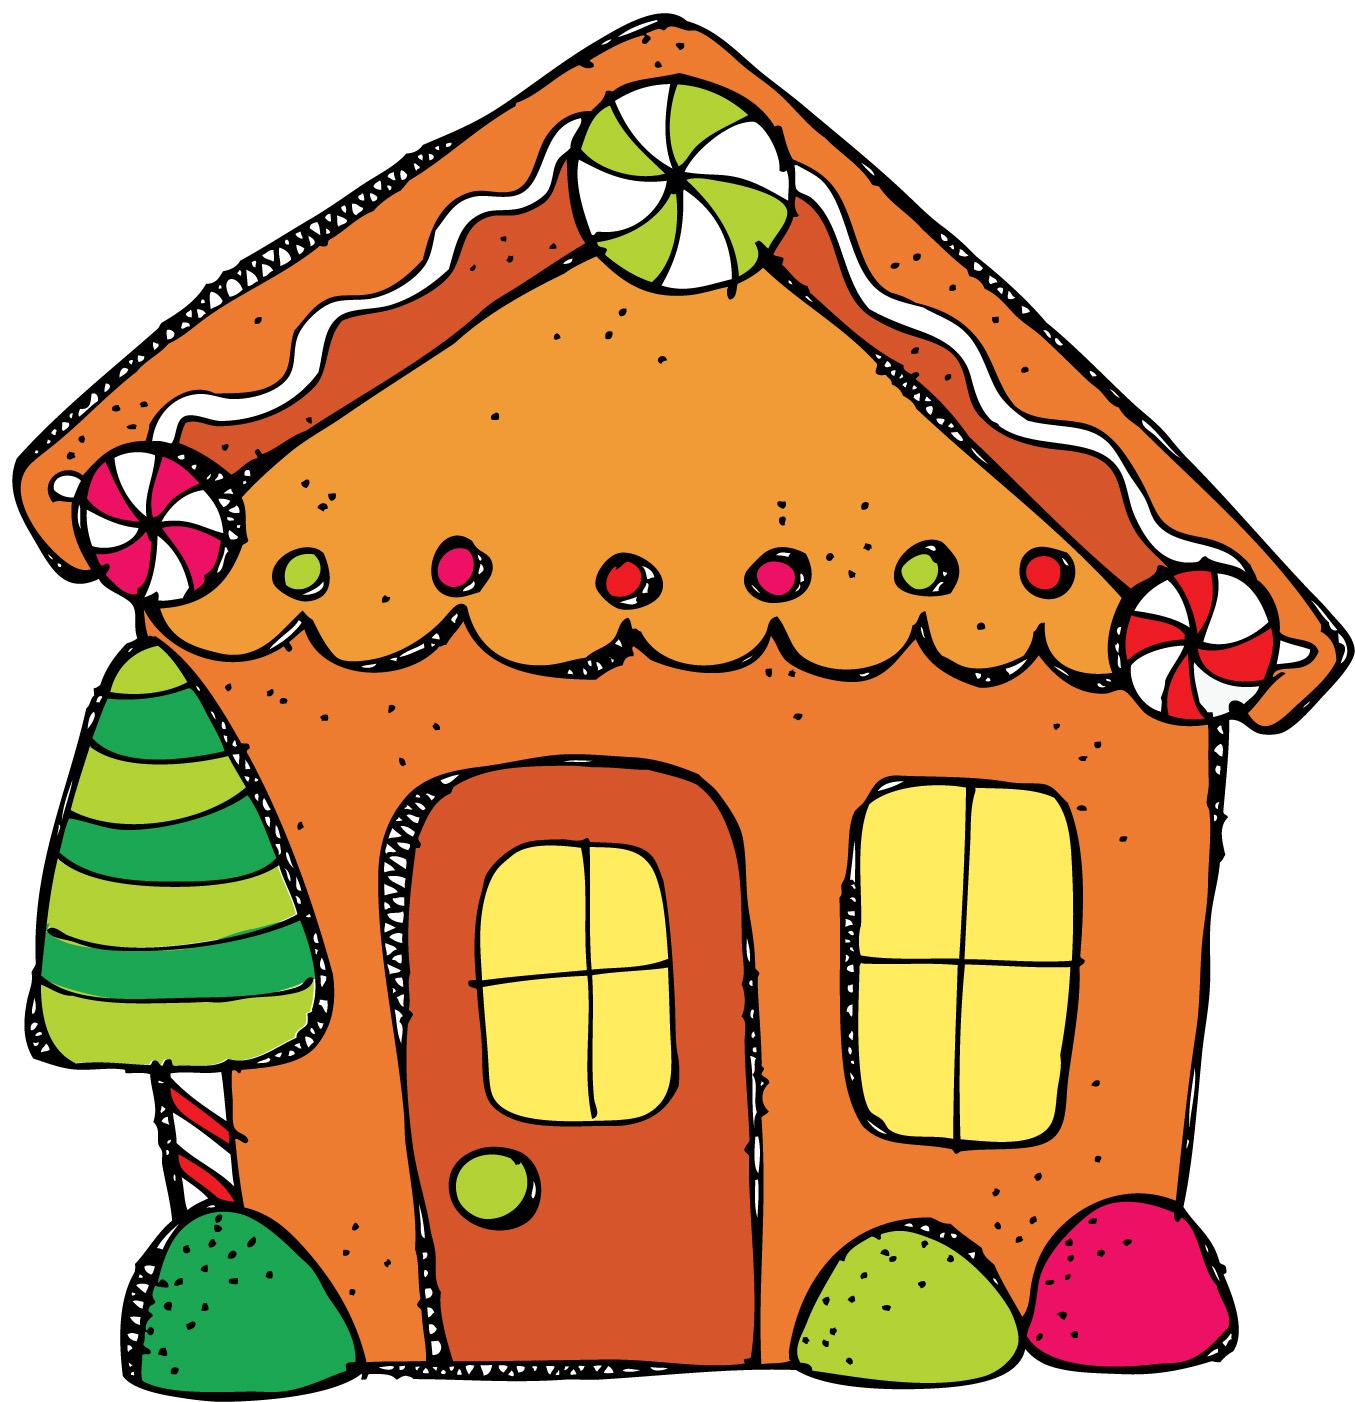 The Very Busy Kindergarten: Gingerbread House